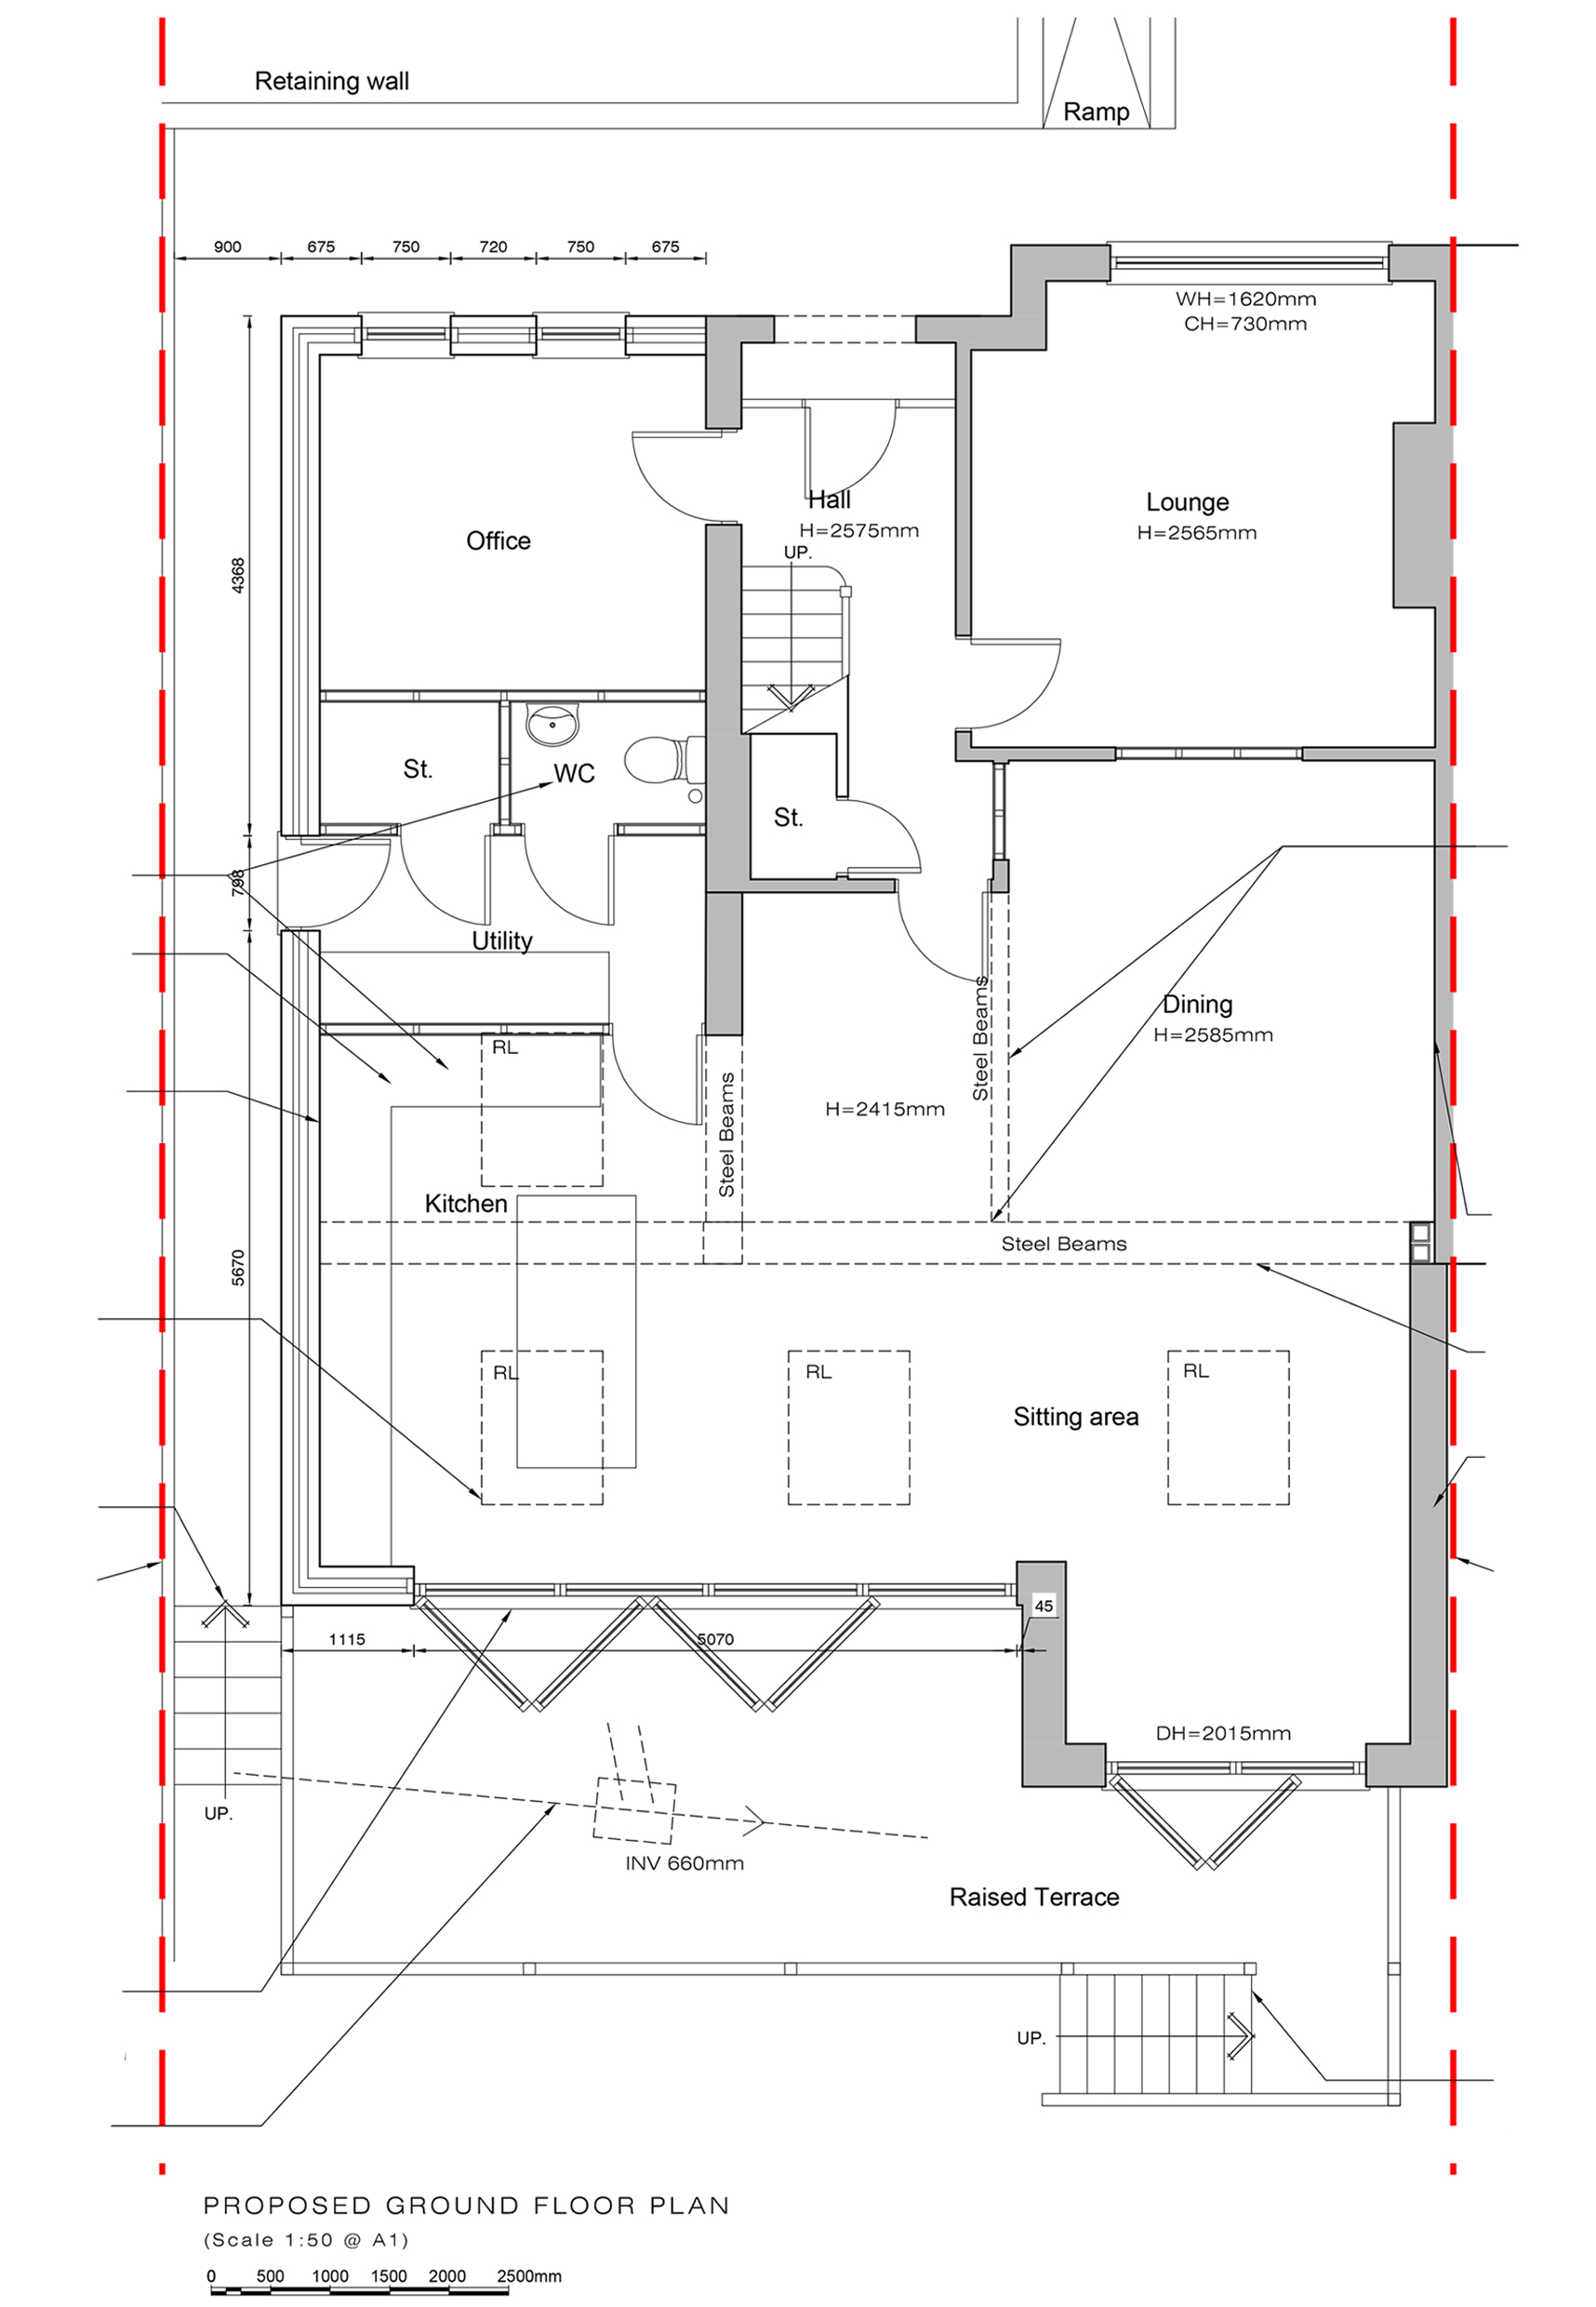 An architects floor plan of a hose